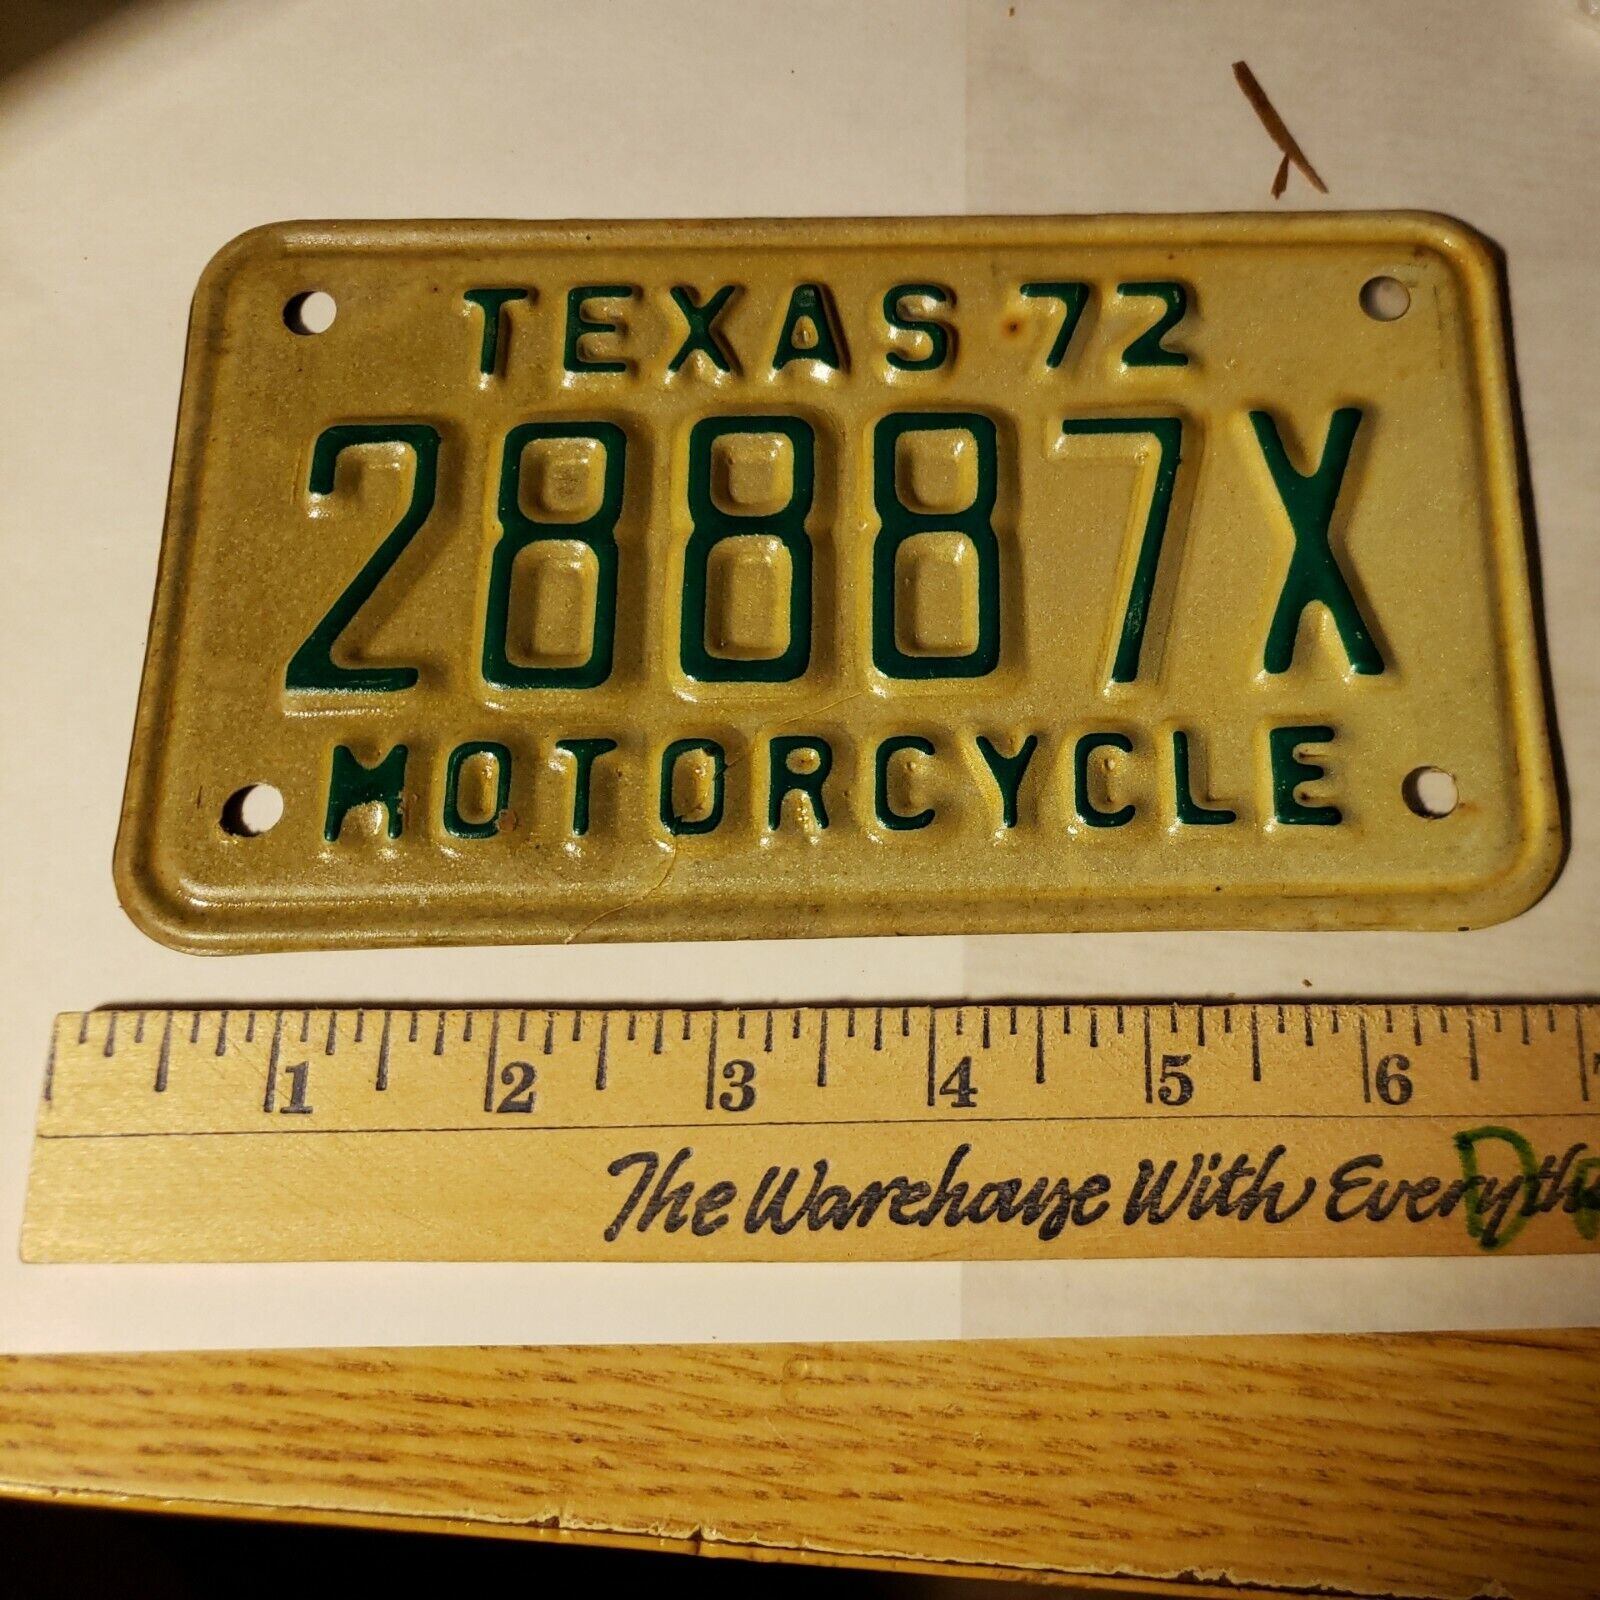 1972 TX TEXAS Motorcycle License Plate 28887X - Green NOS Harley Bike cycle 72